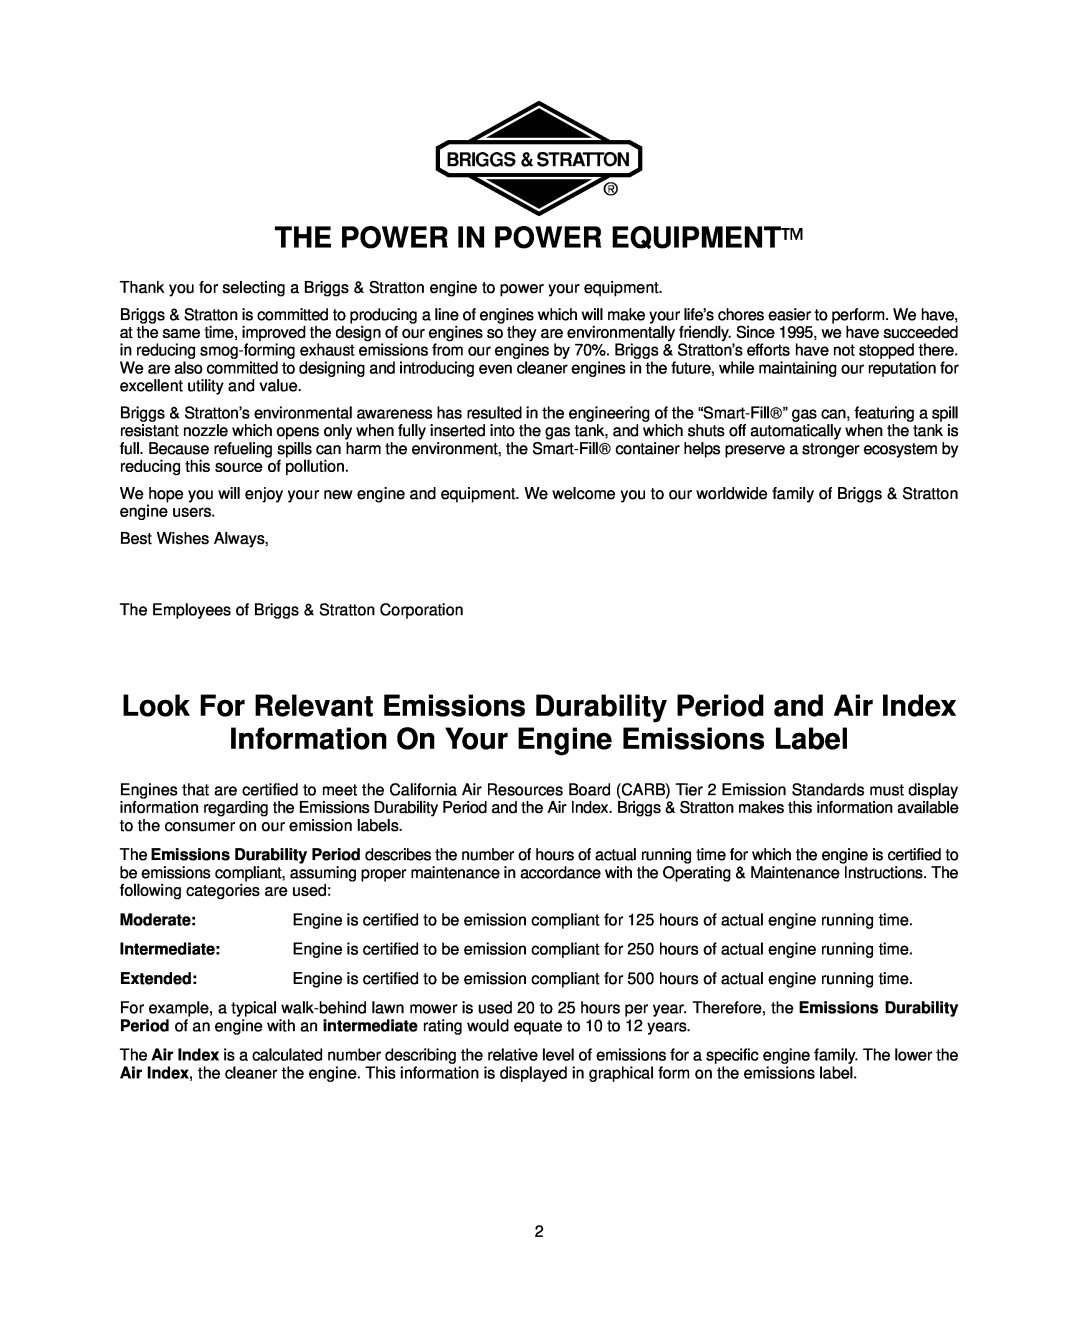 Briggs & Stratton 380700 The Power In Power Equipment, Look For Relevant Emissions Durability Period and Air Index 